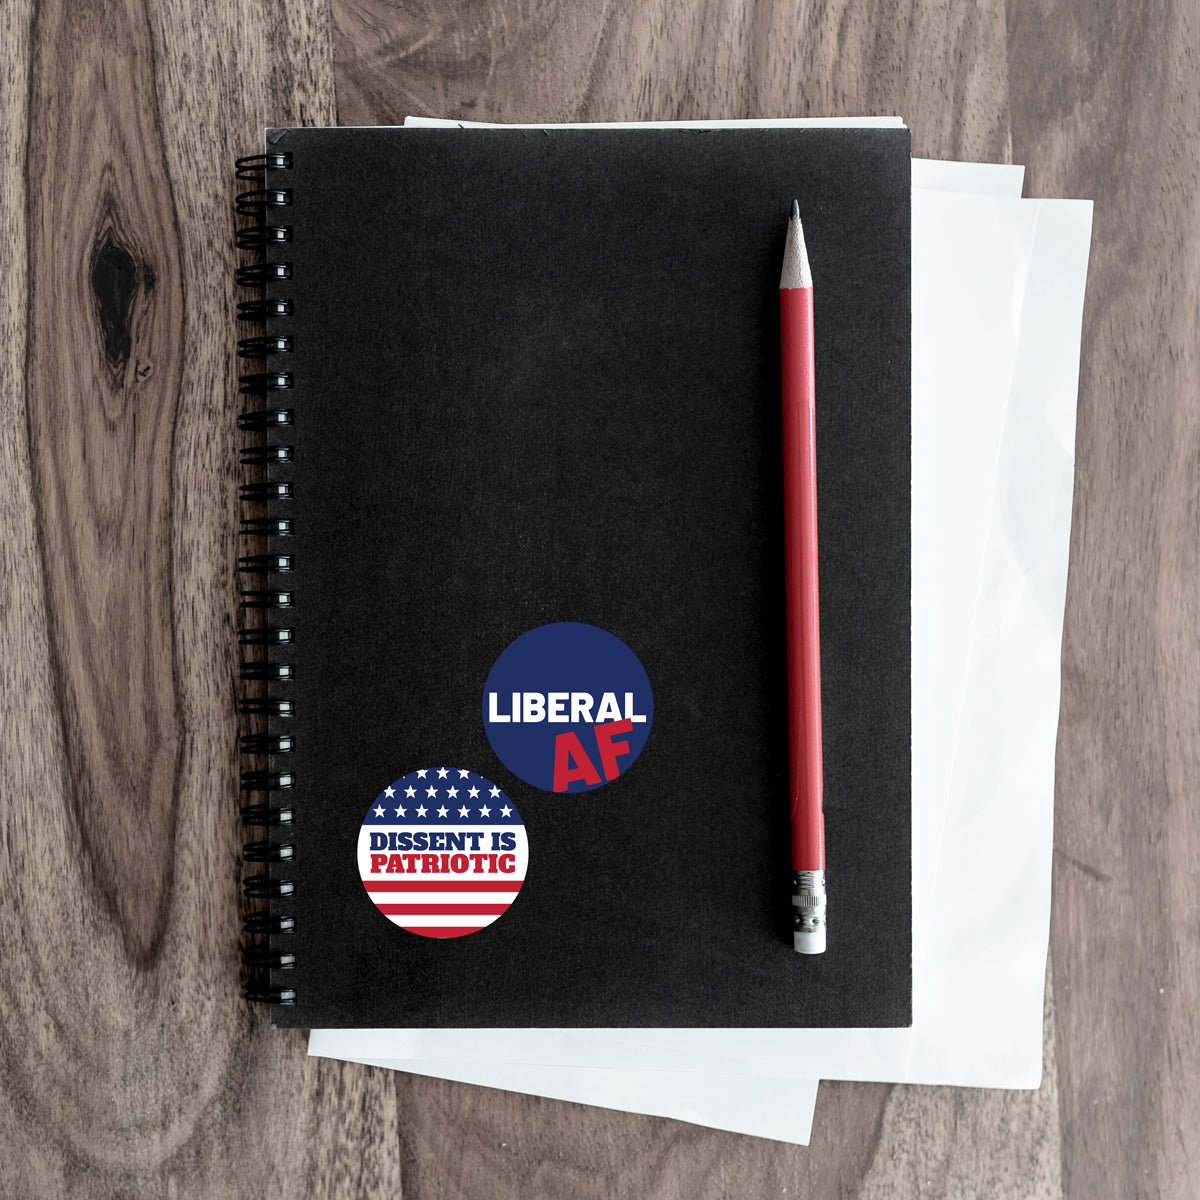 liberal and dissent stickers on a notebook